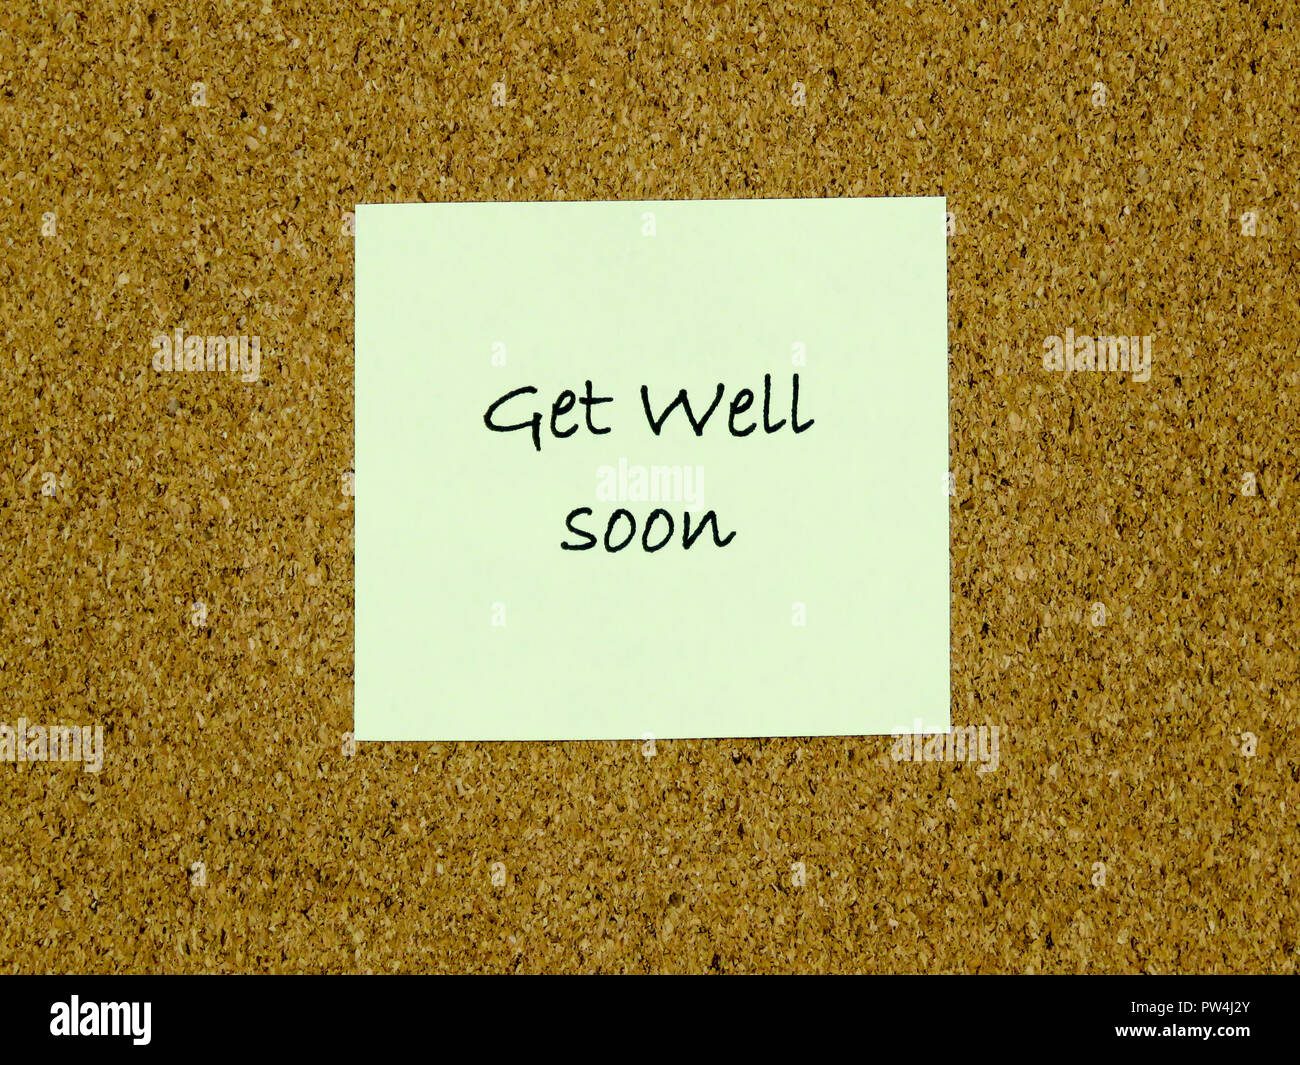 A yellow sticky note with get well soon written on it on a cork board background Stock Photo